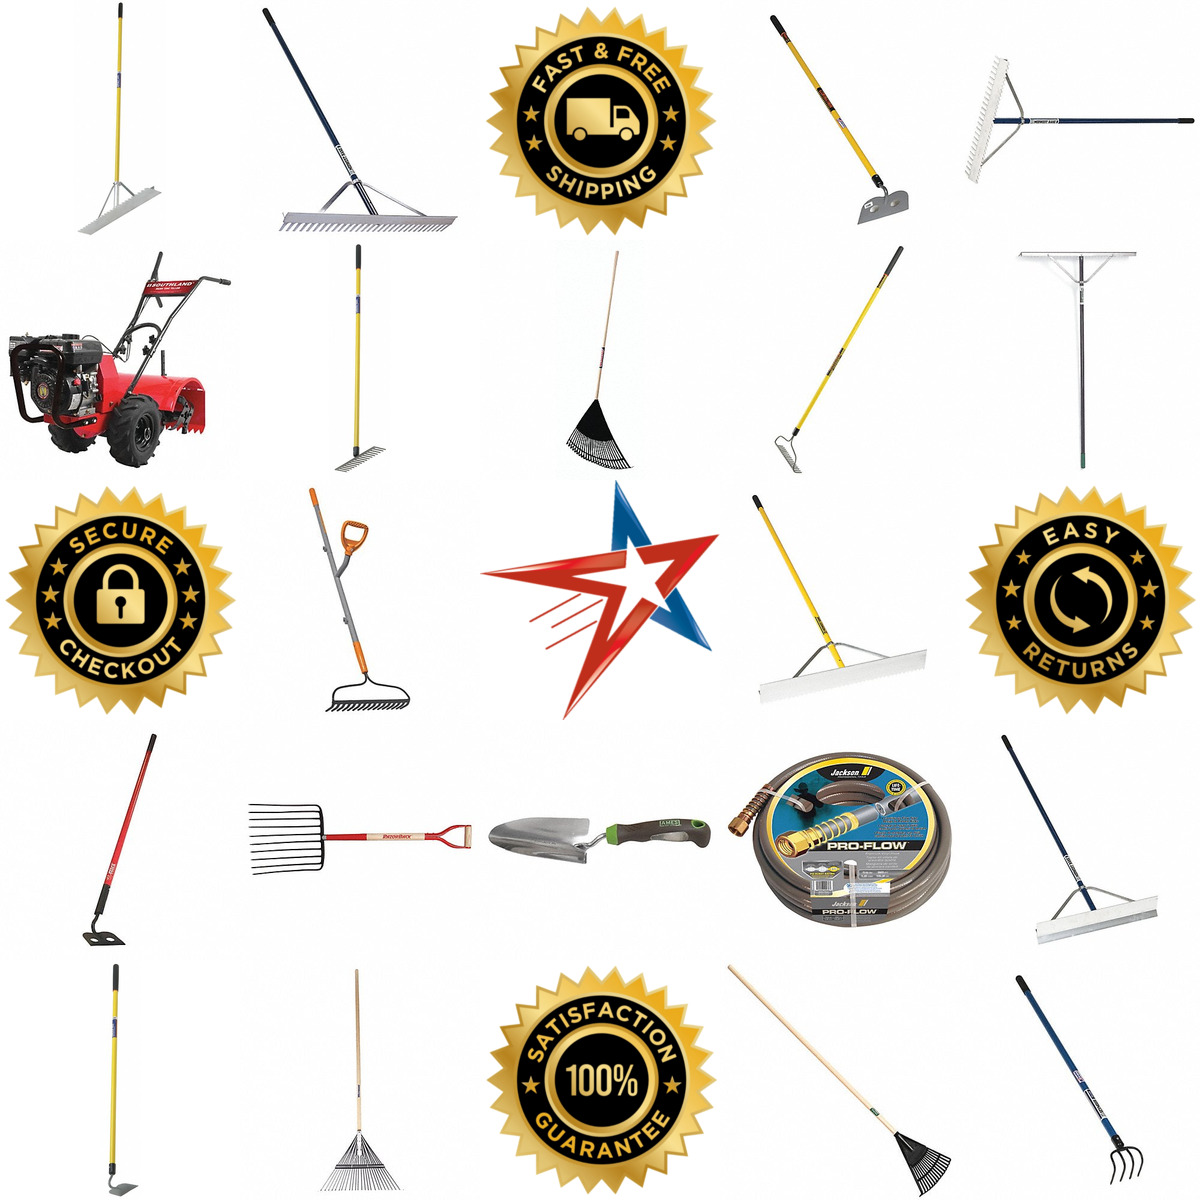 A selection of Rakes and Cultivating Tools products on GoVets